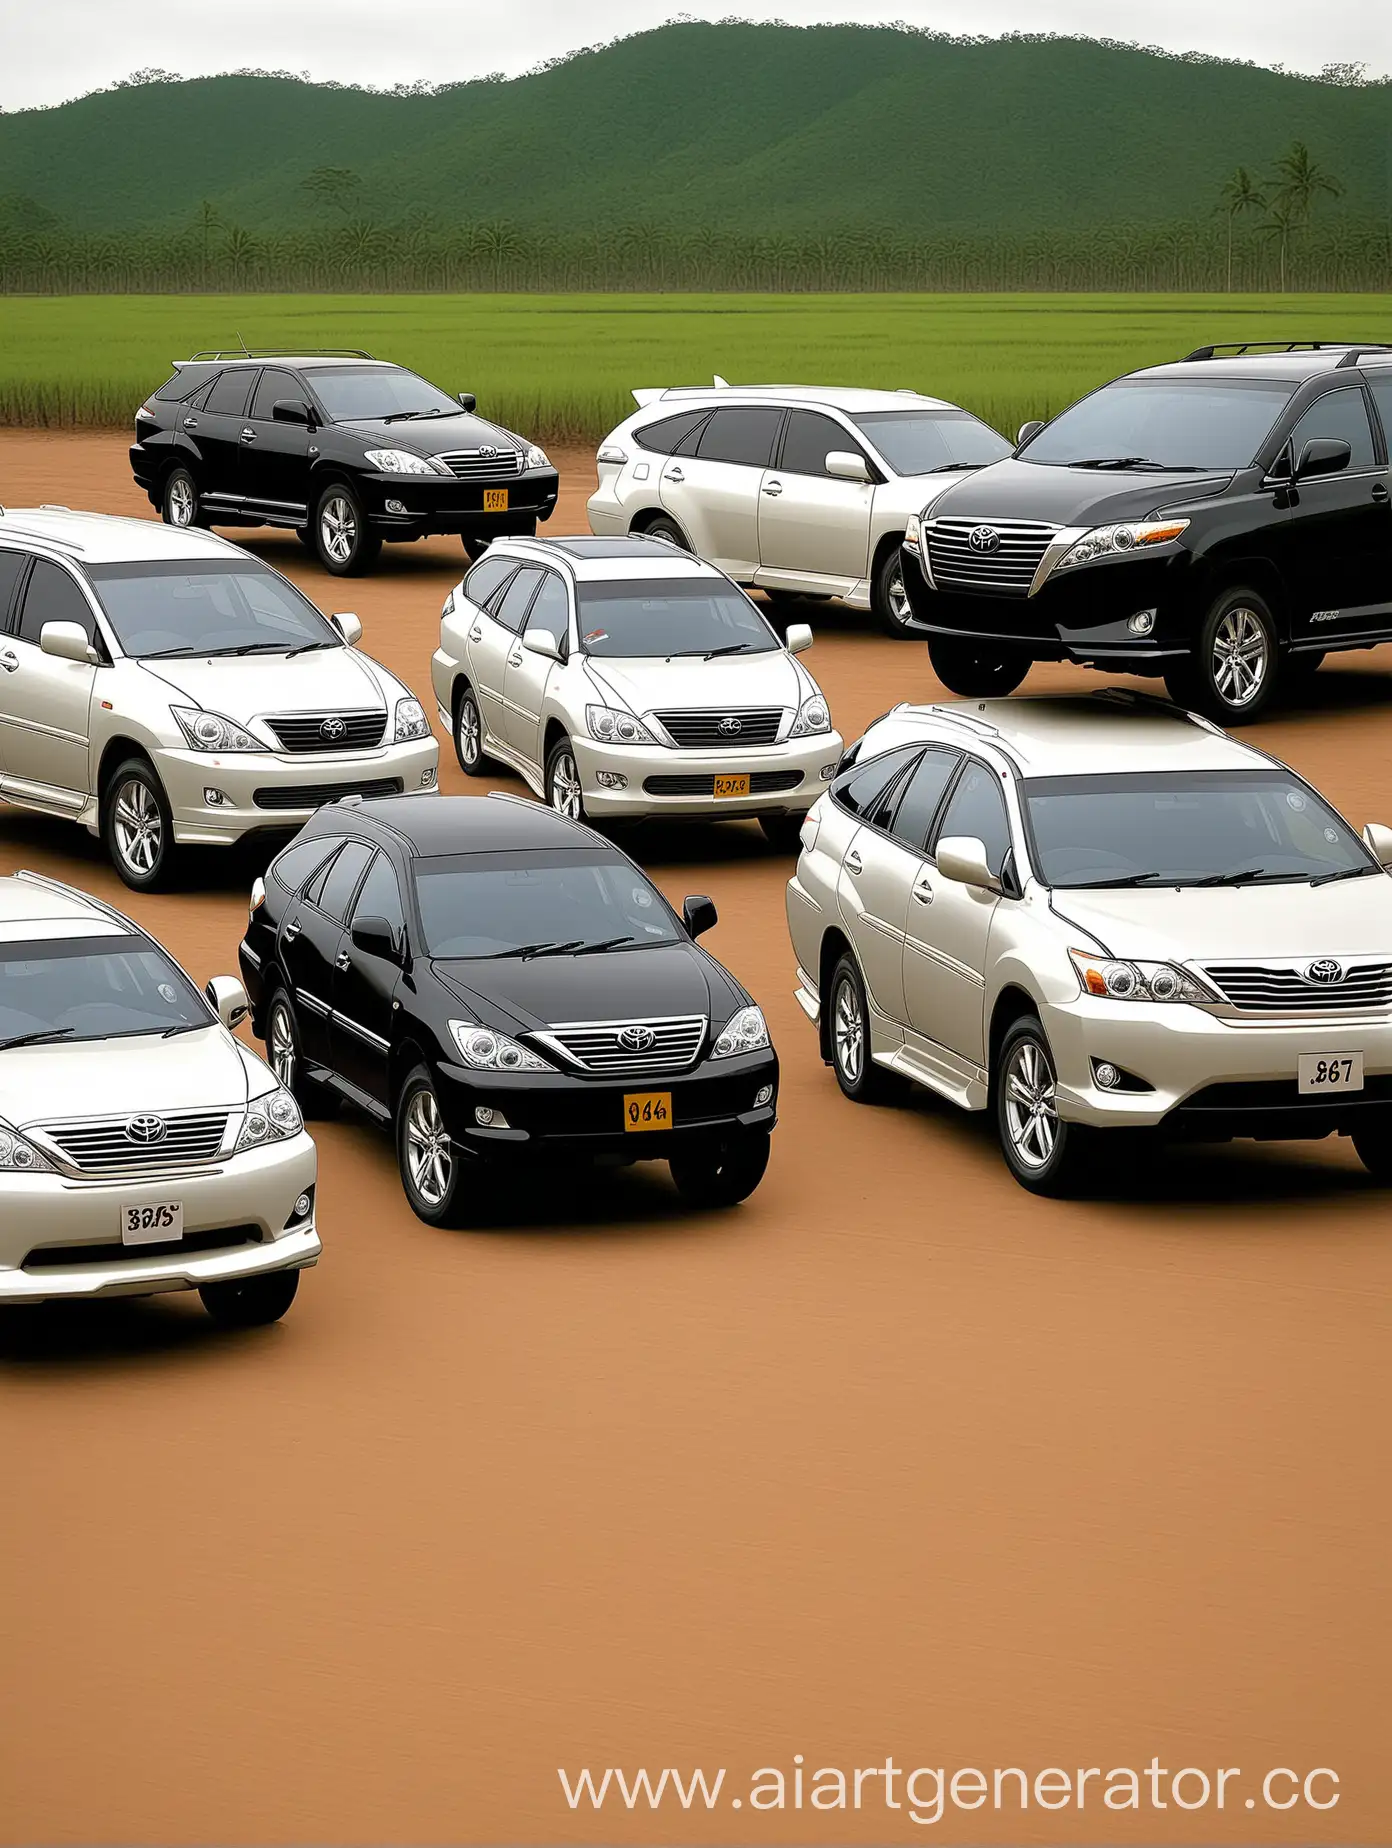 Toyota-Harrier-Family-Van-and-Big-6x6-Truck-Parked-Together